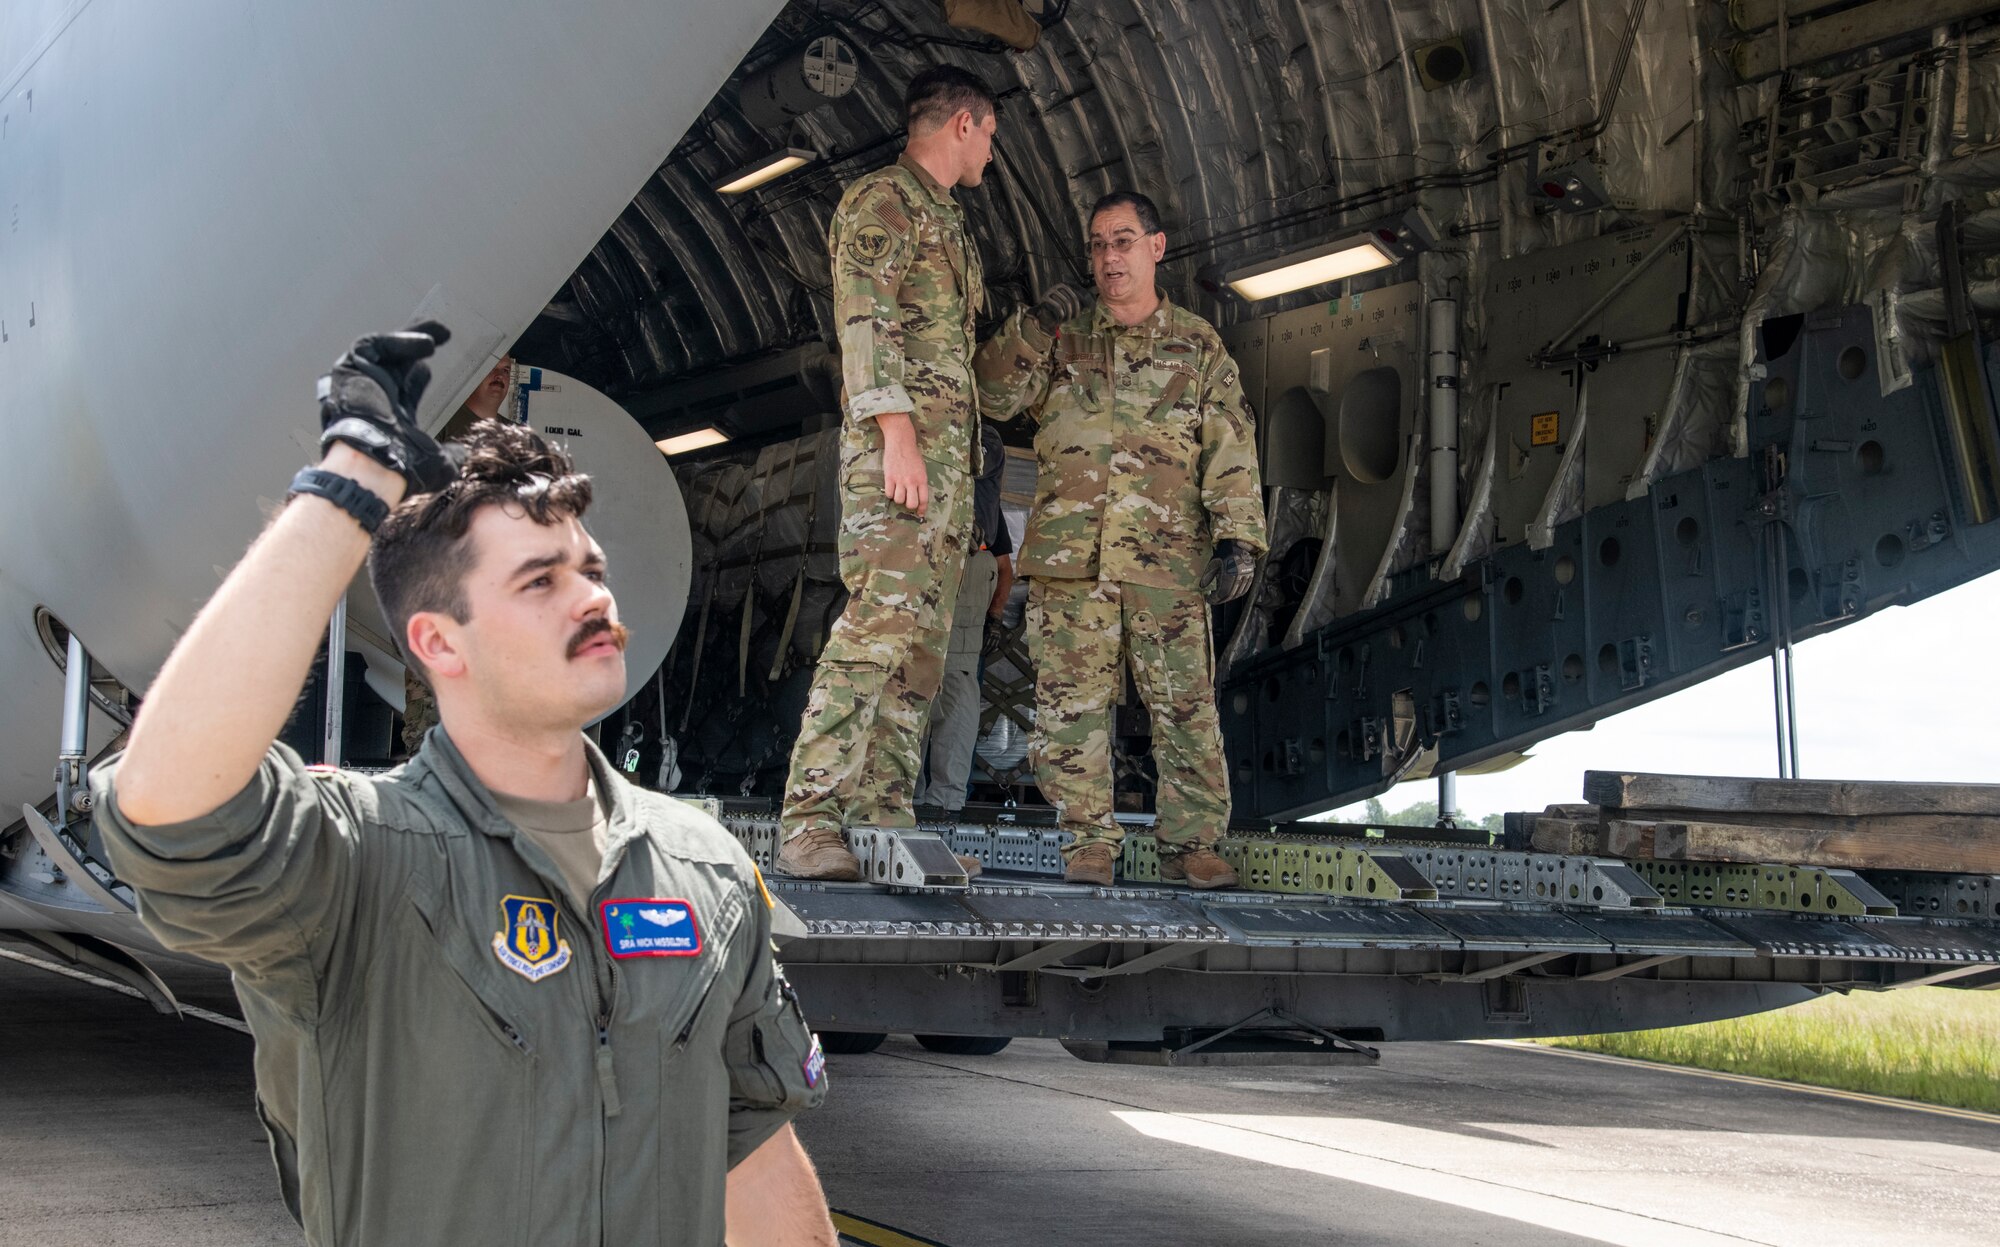 Loadmasters: Mentorship starts with each other